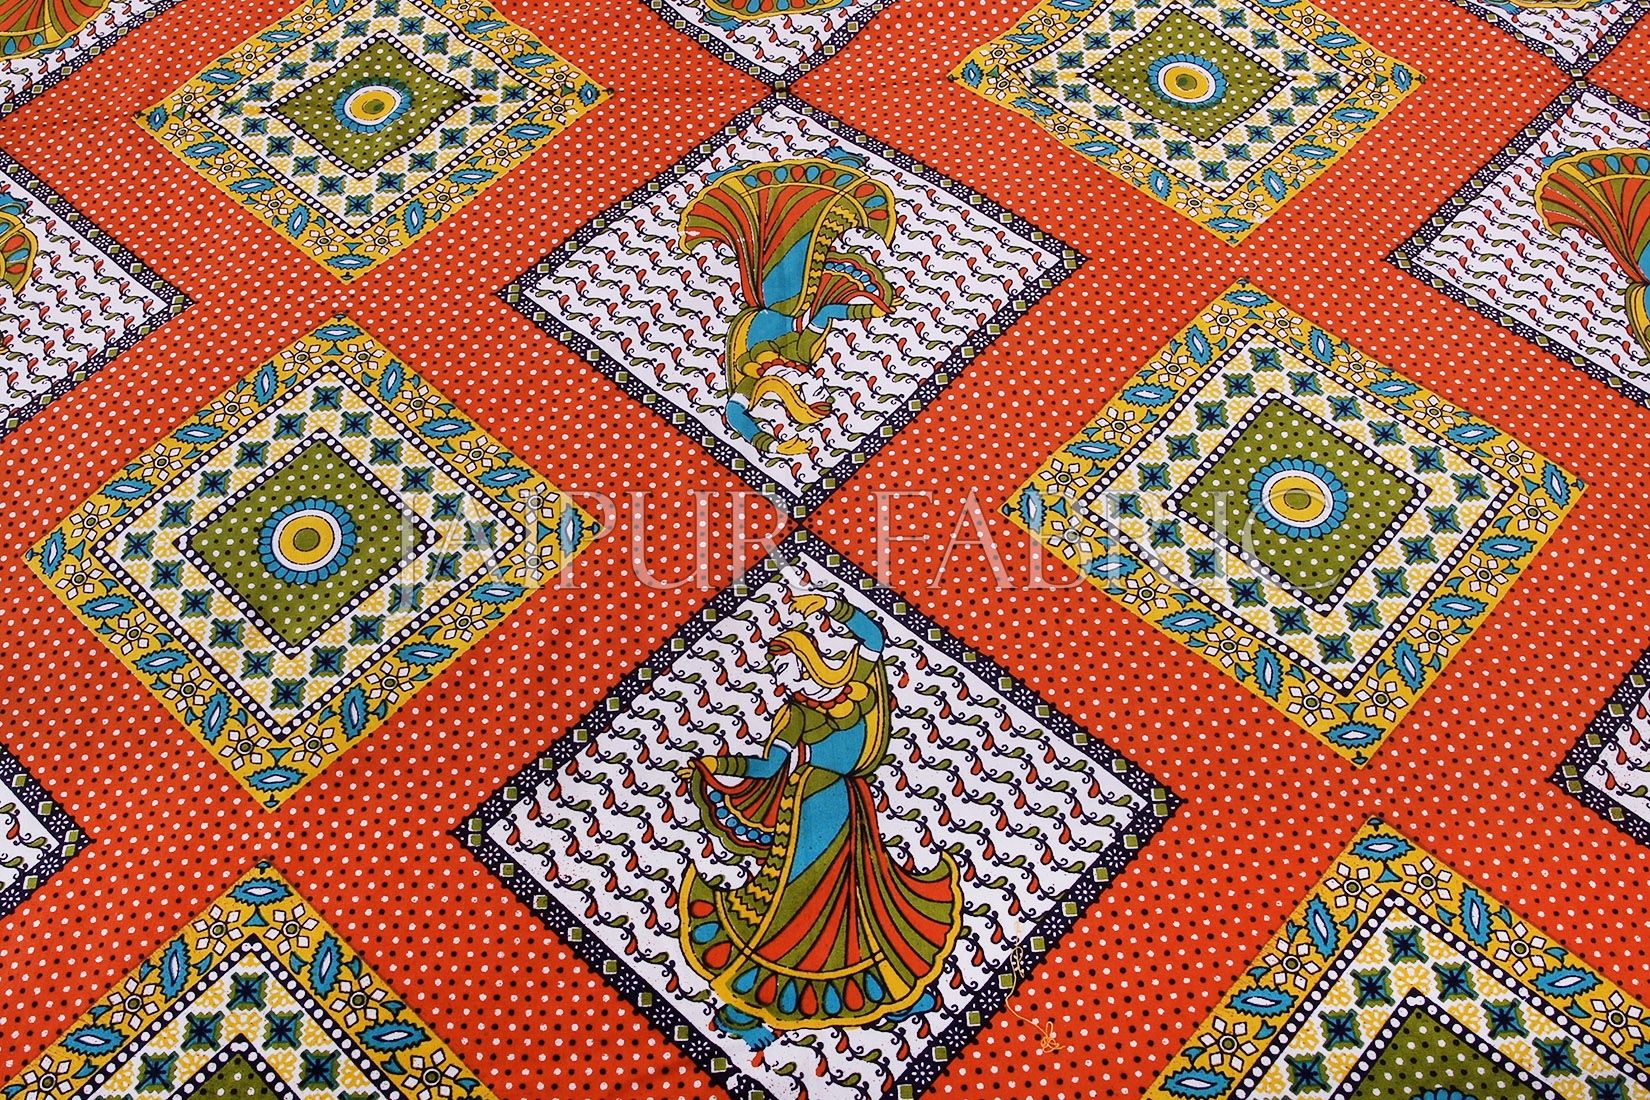 Red and Orange Border With Beige Color Design Double Cotton Bed Sheet